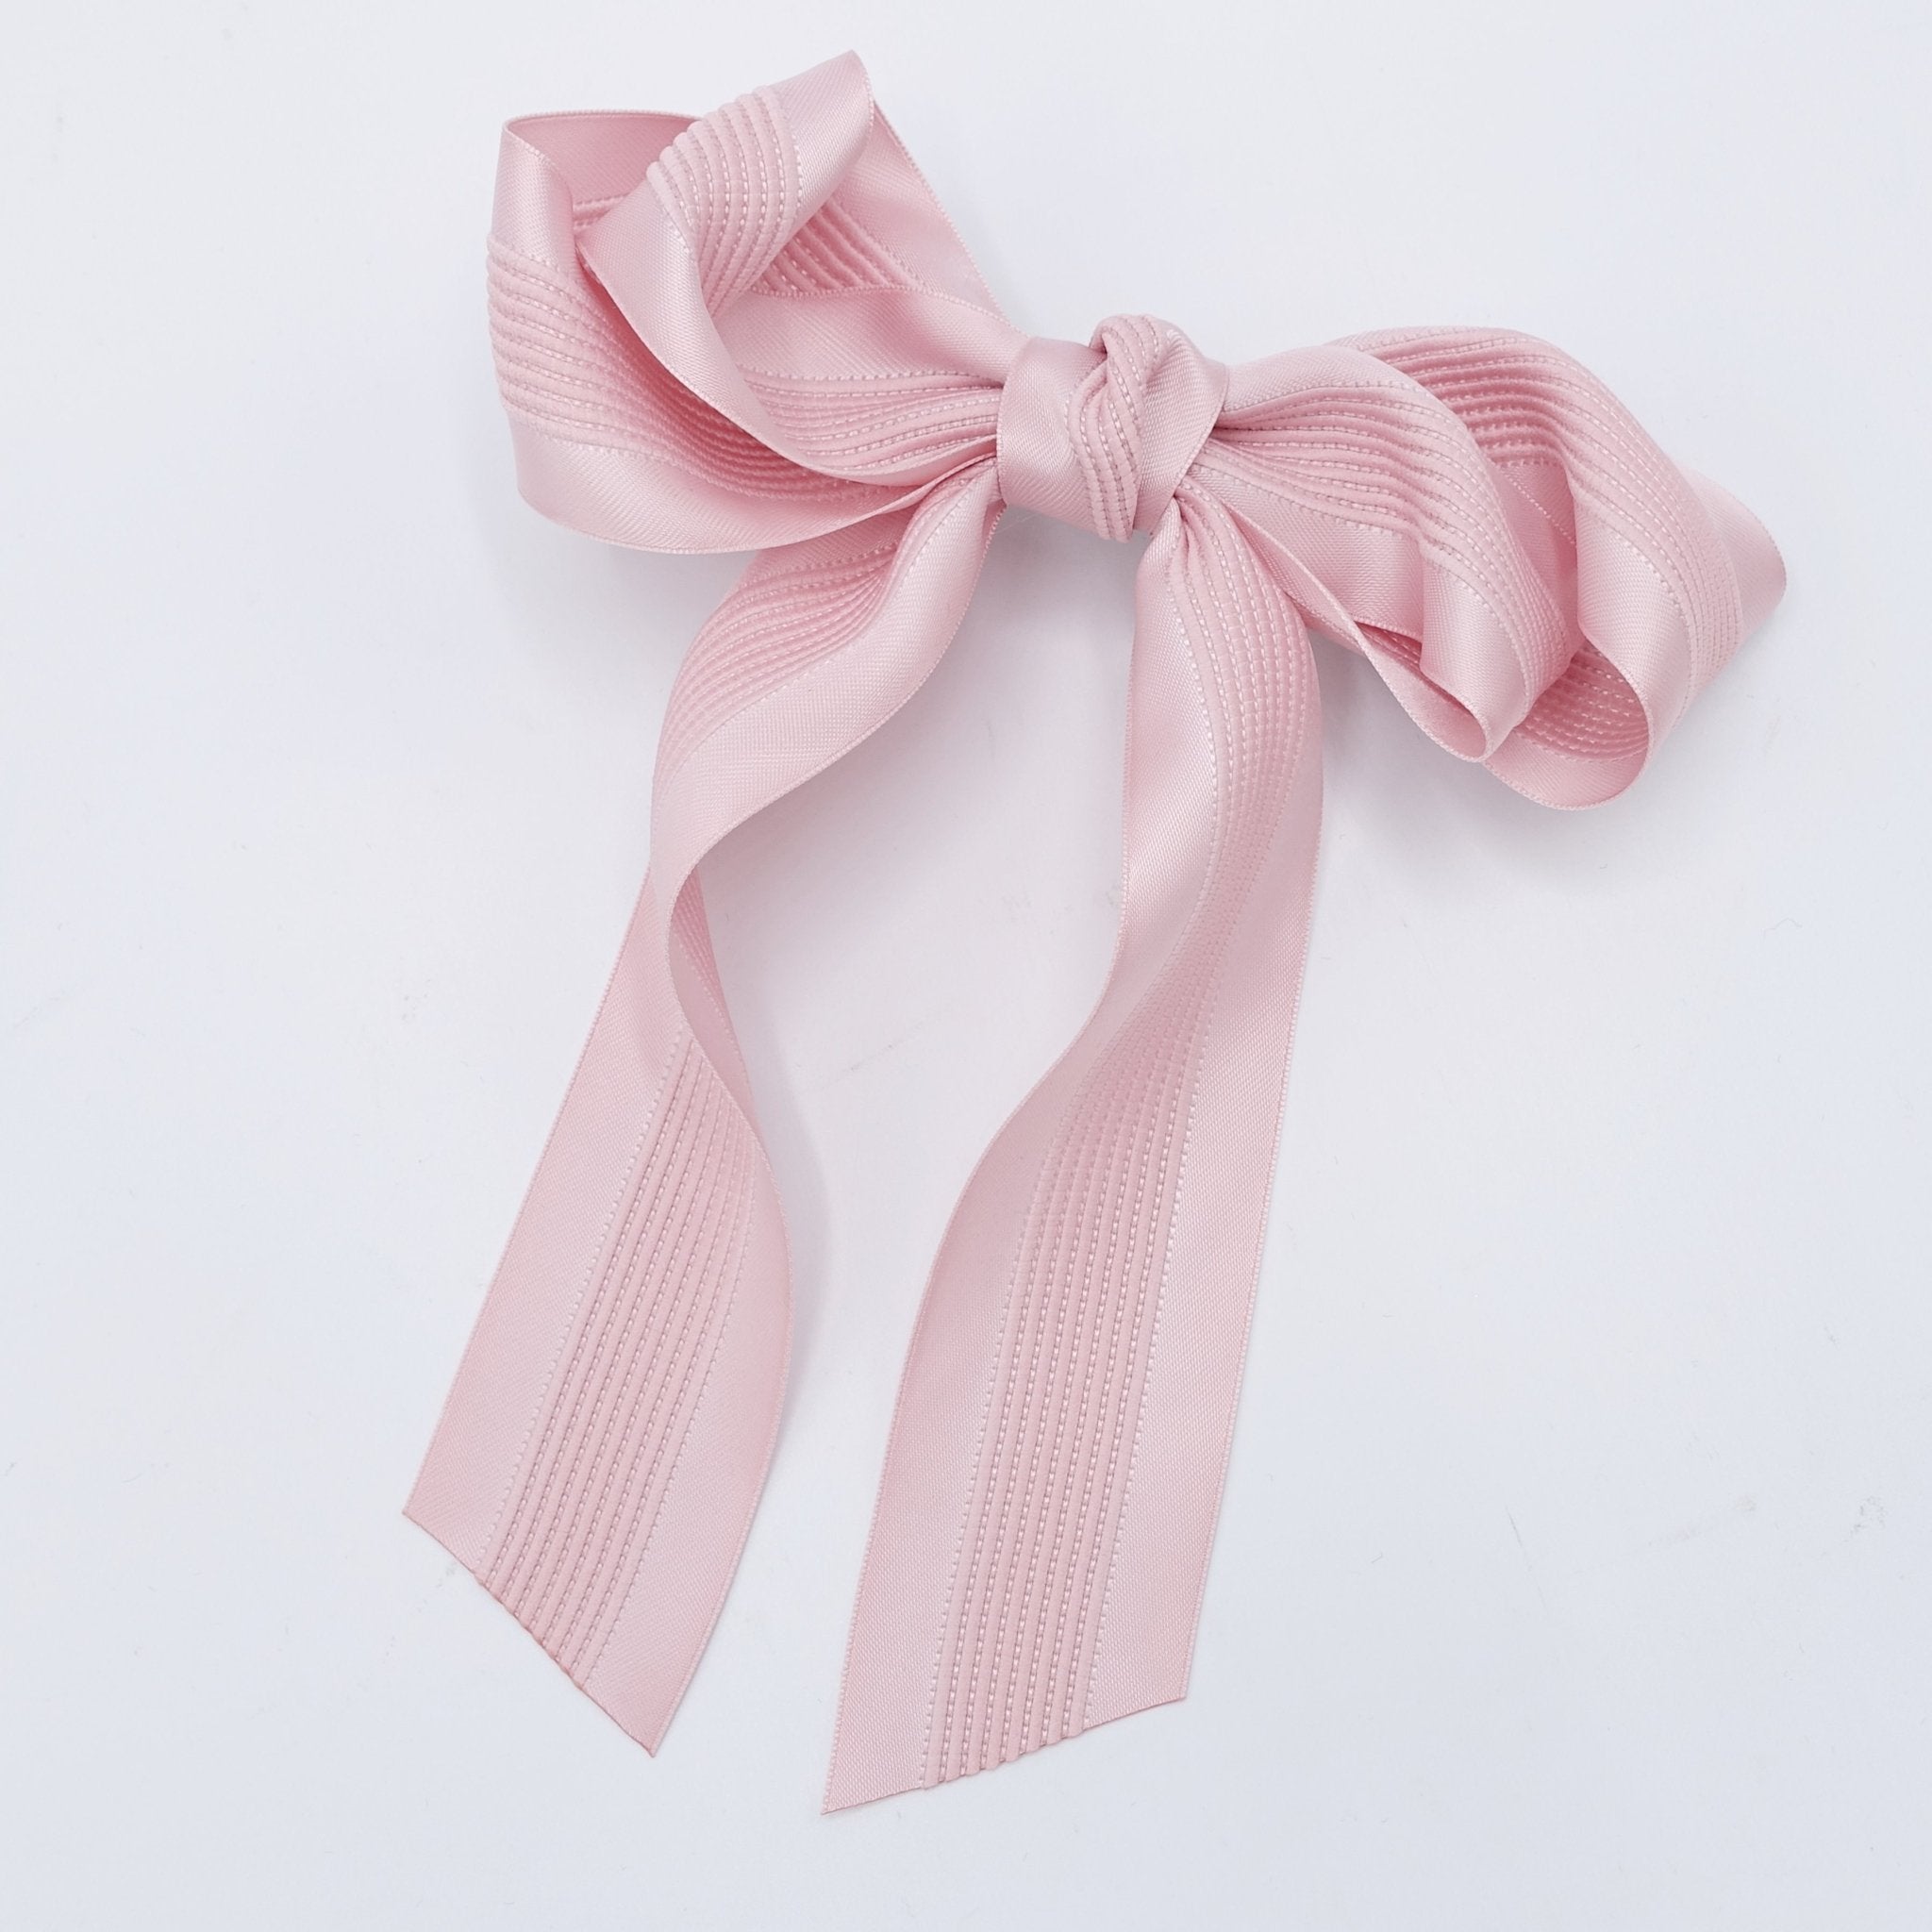 veryshine.com claw/banana/barrette long tail layered hair bow corrugated stripe bow french hair barrette